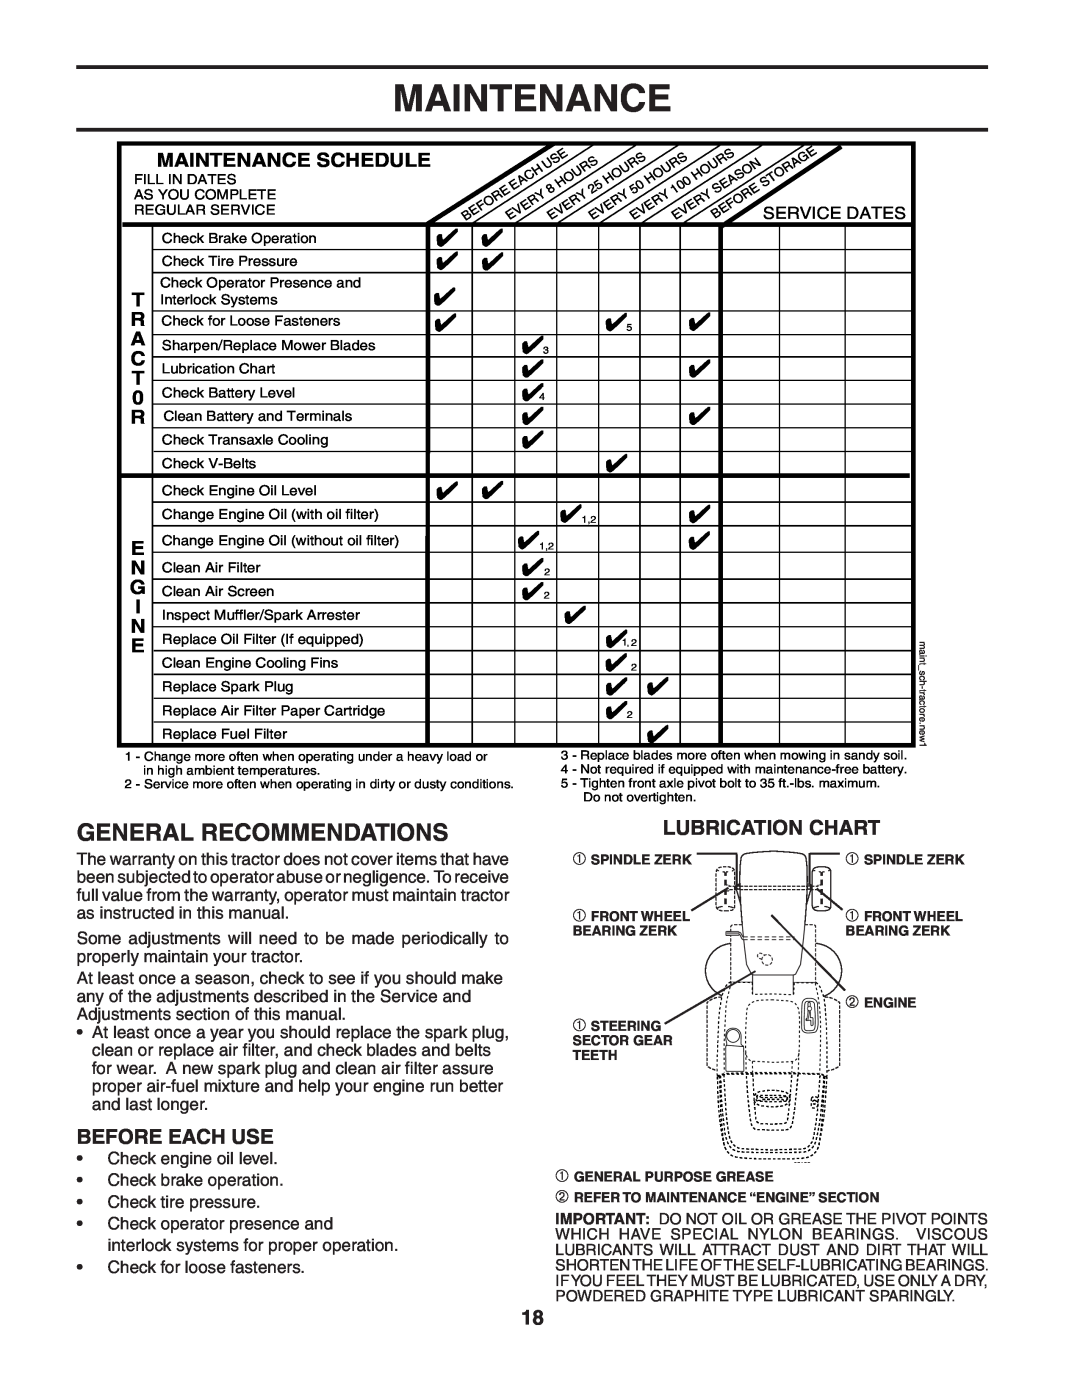 Husqvarna CTH151 owner manual General Recommendations, Before Each Use, Lubrication Chart, Maintenance Schedule 